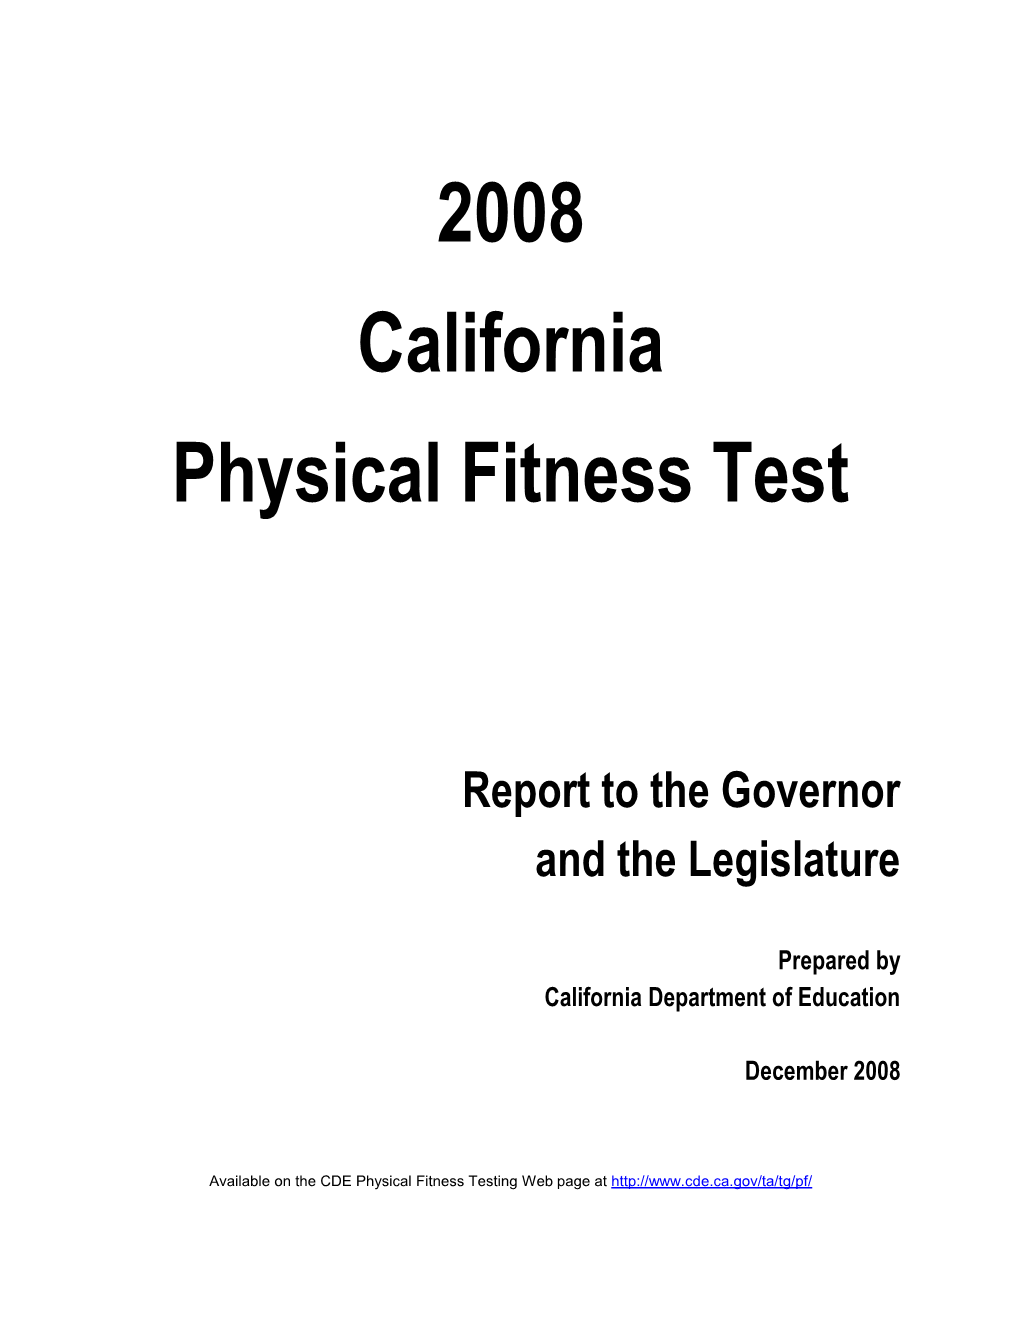 2008 PFT Governor's Report - PFT (CA Dept of Education)